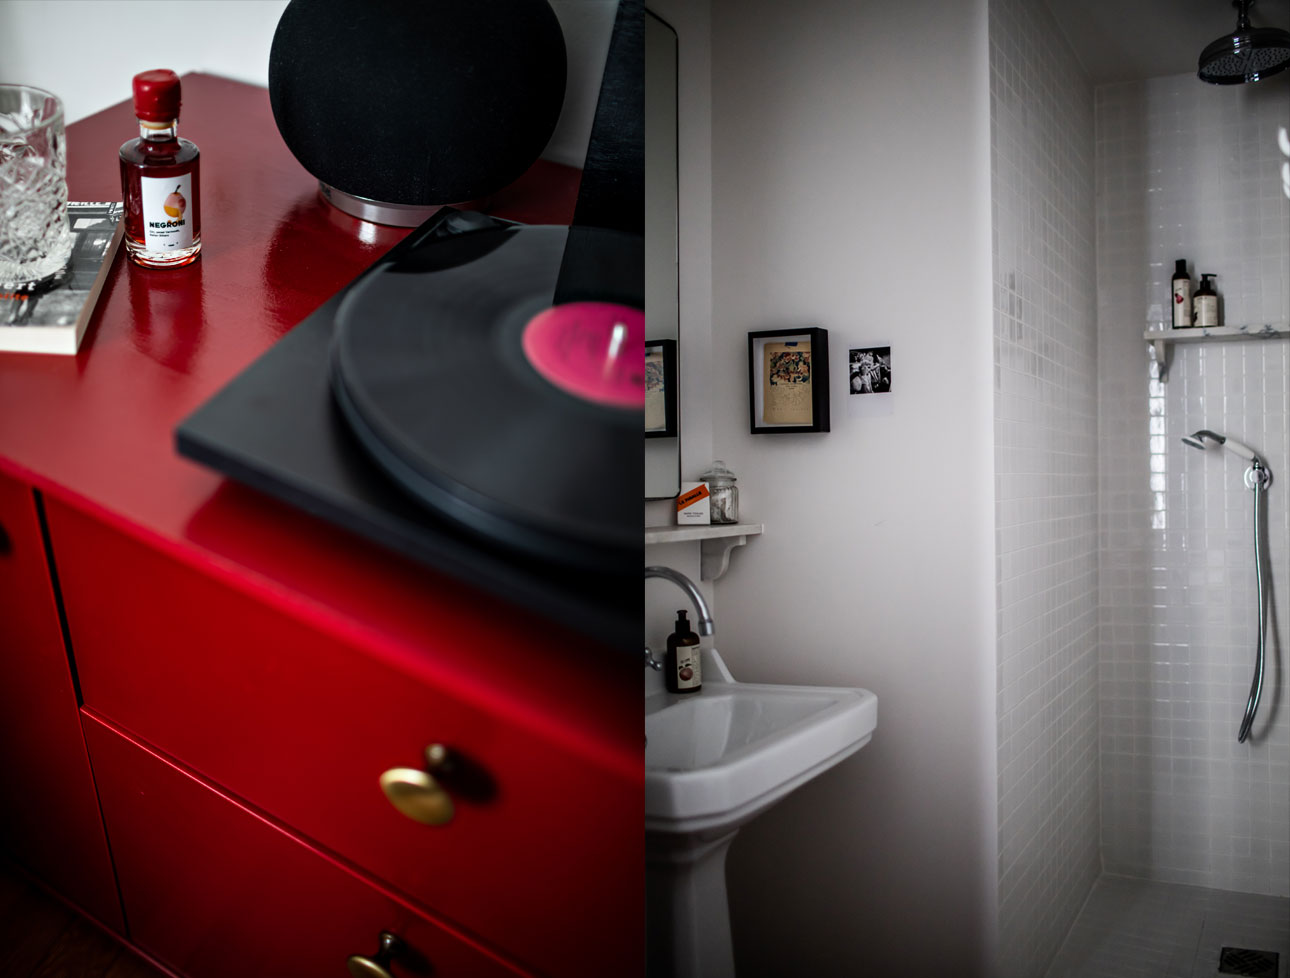 in-room-record-player-bathroom-shower-details-amenities-le-pigalle-hotel-paris-